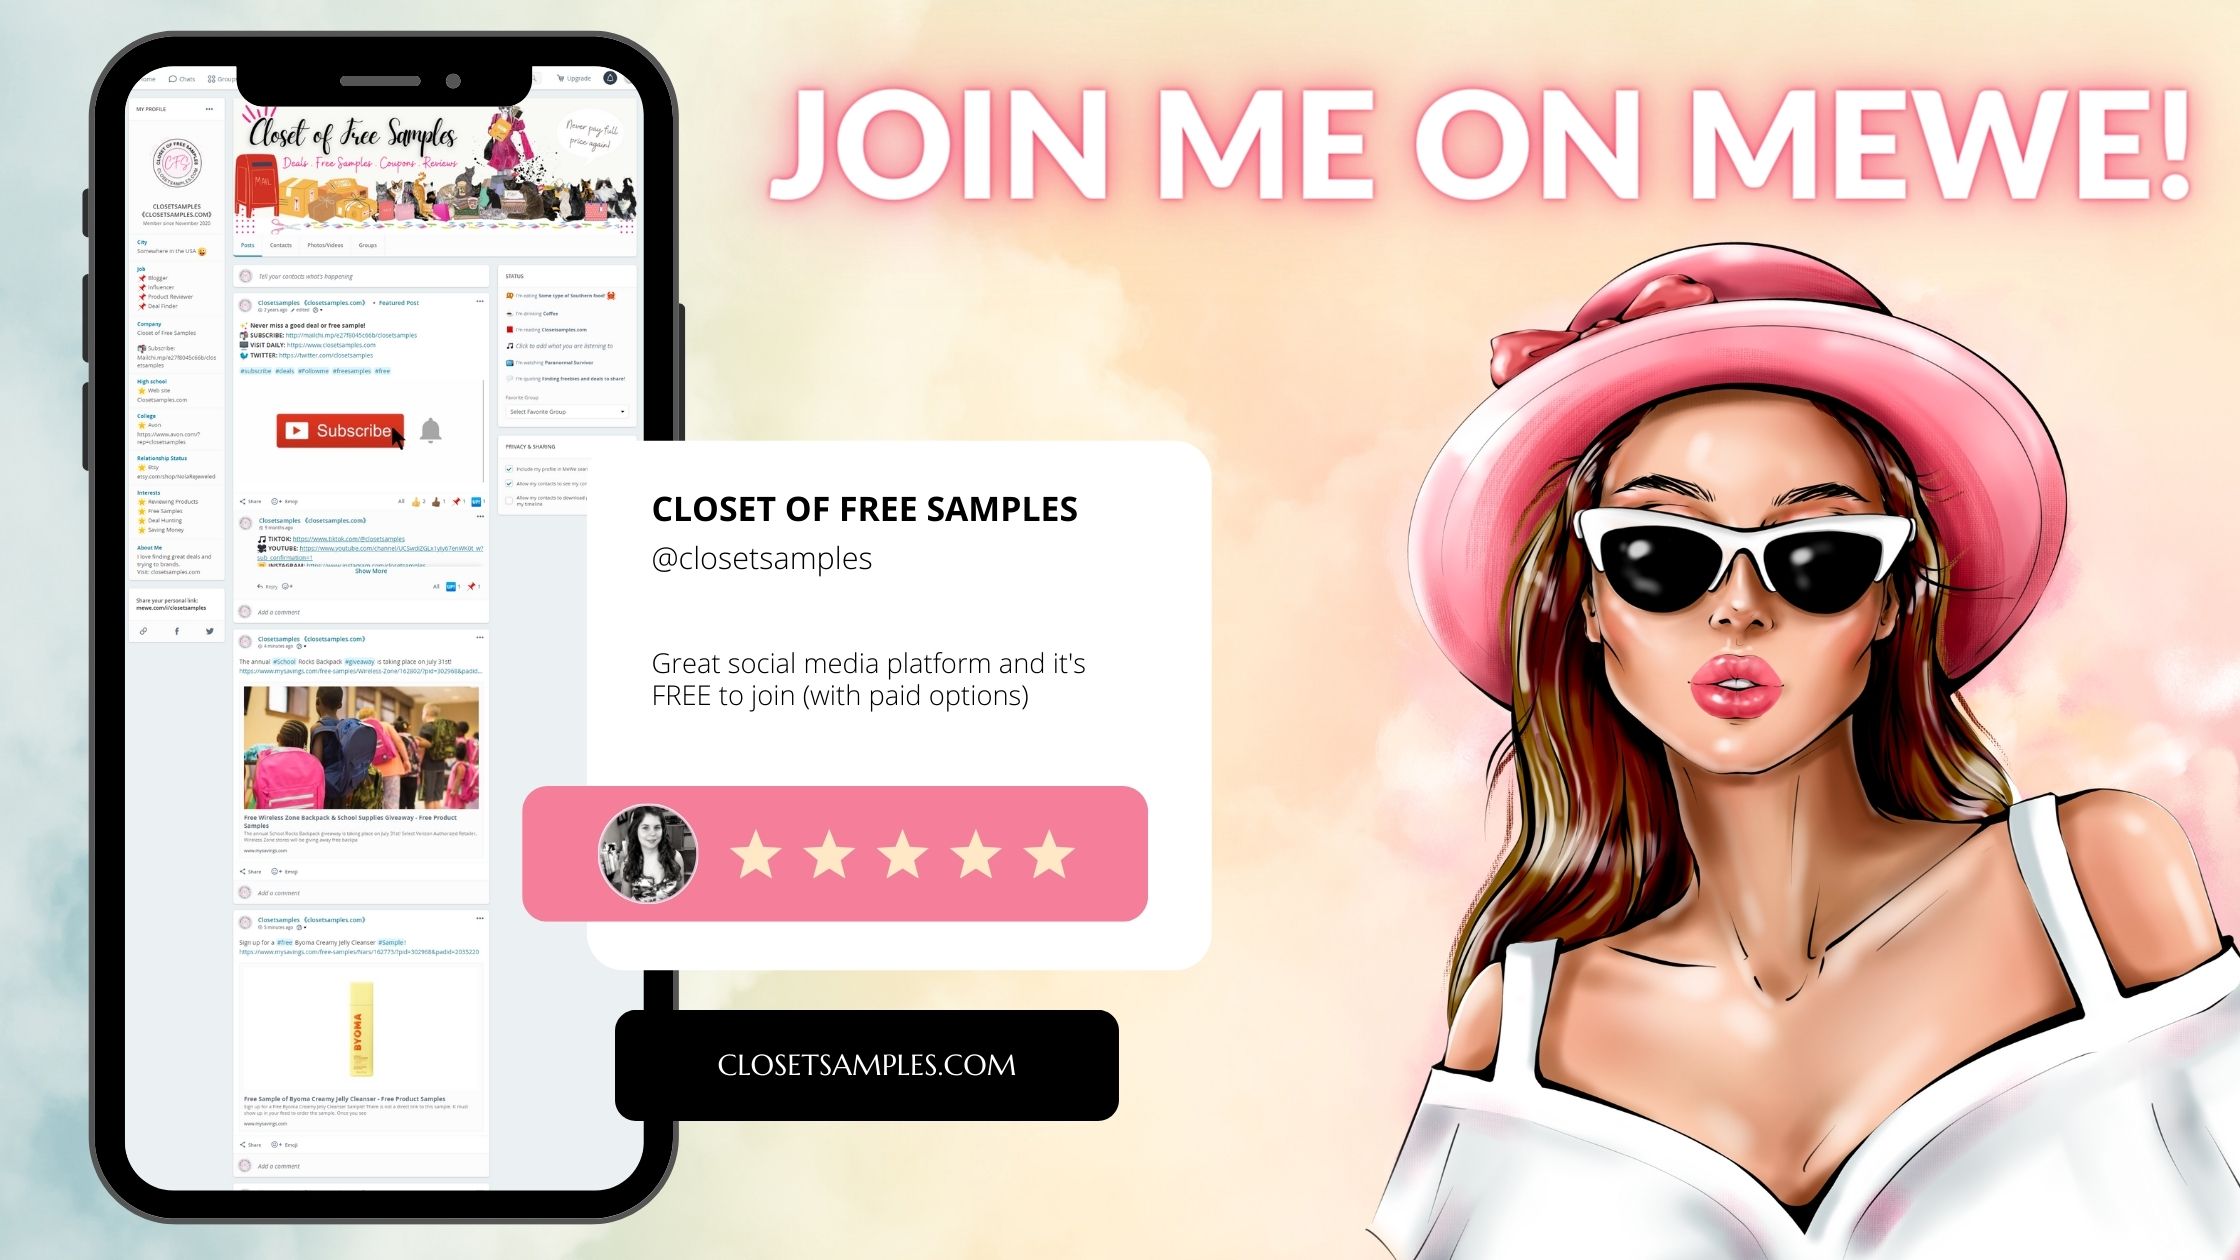 Join Closet of Free Samples on MeWe closetsamples